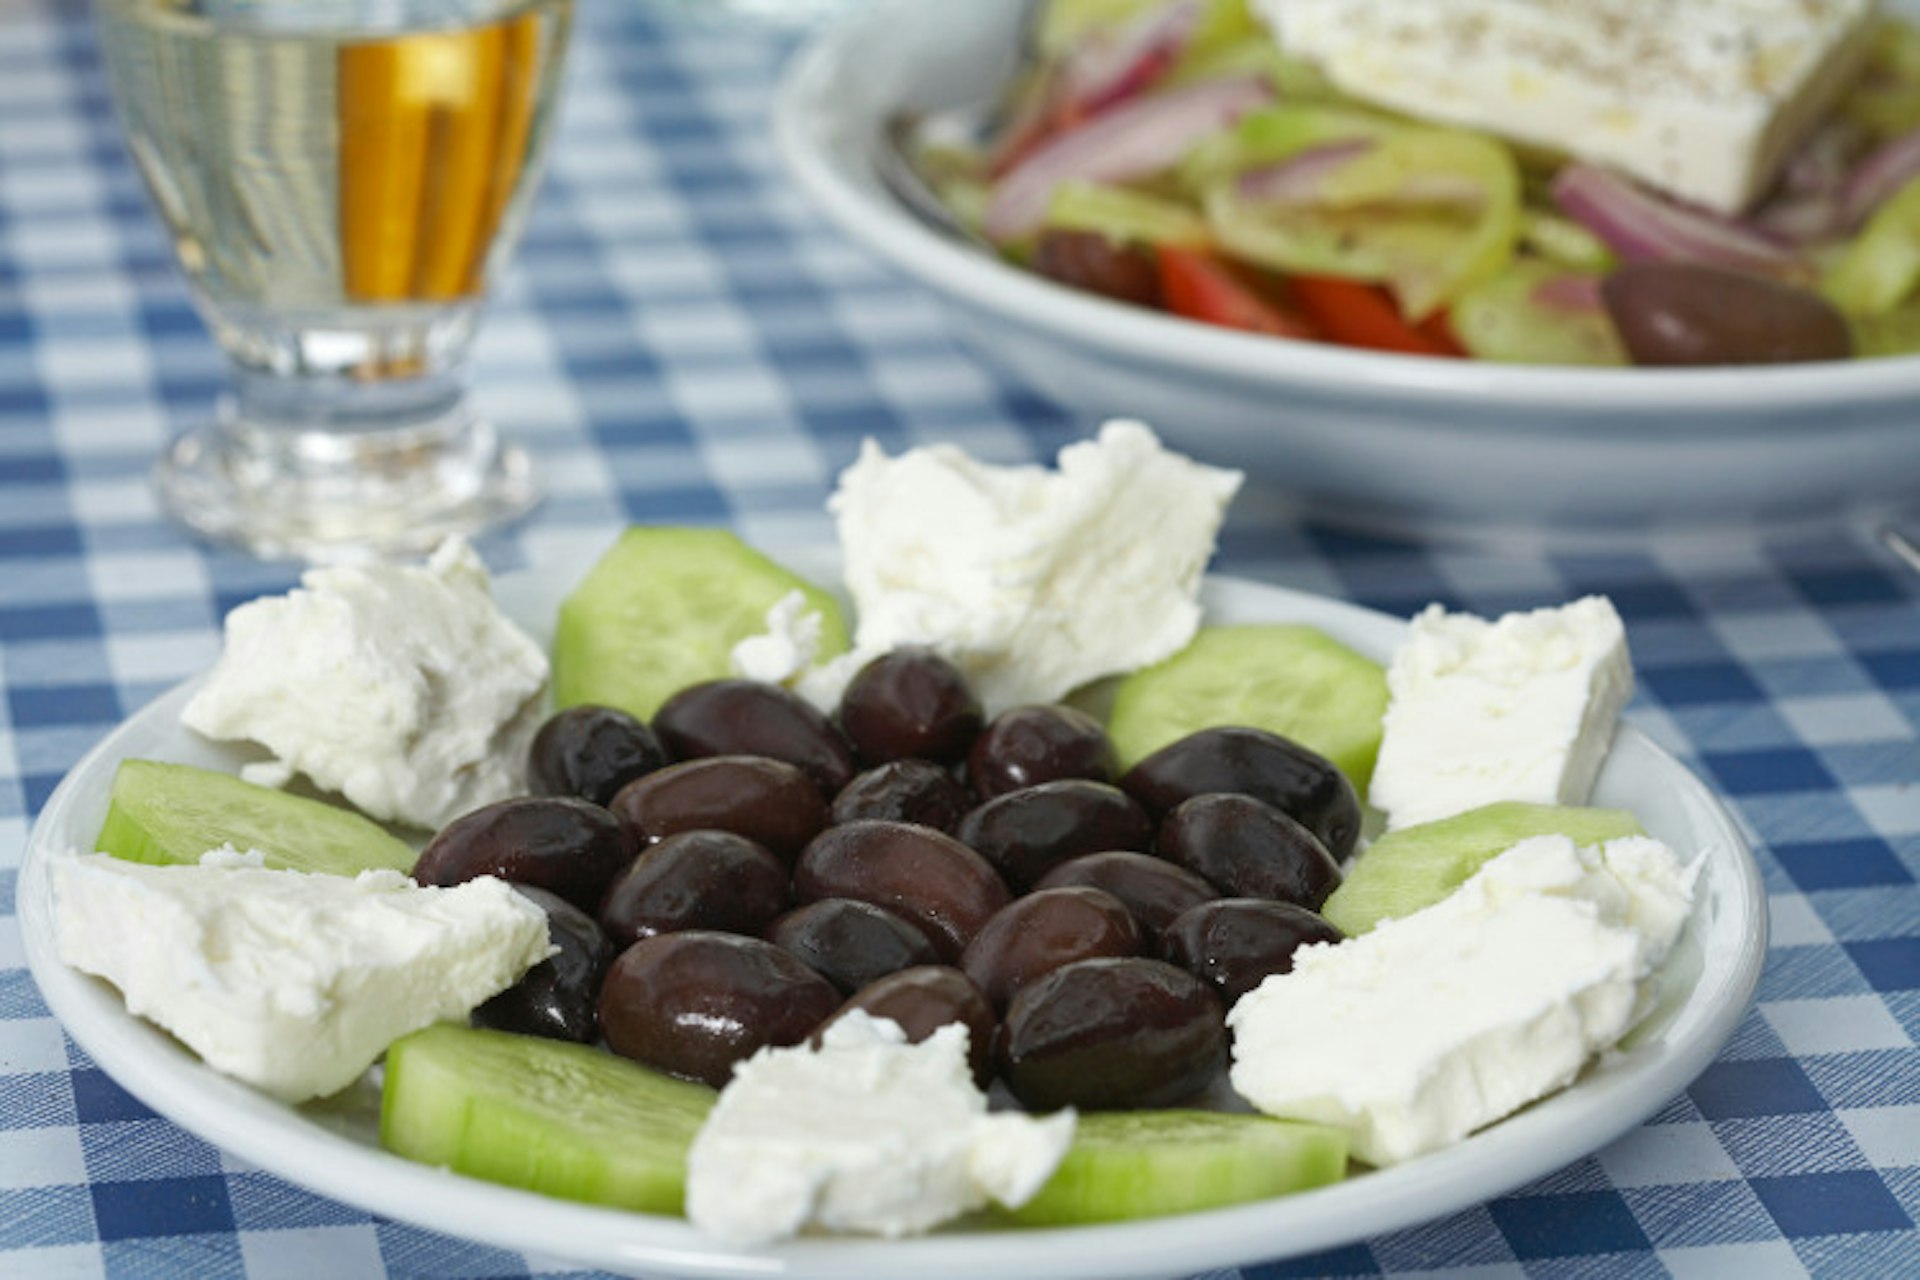 Traditional Greek salad accompanied with a glass of retsina. Image by Judith Haeusler / Cultura / Getty Images